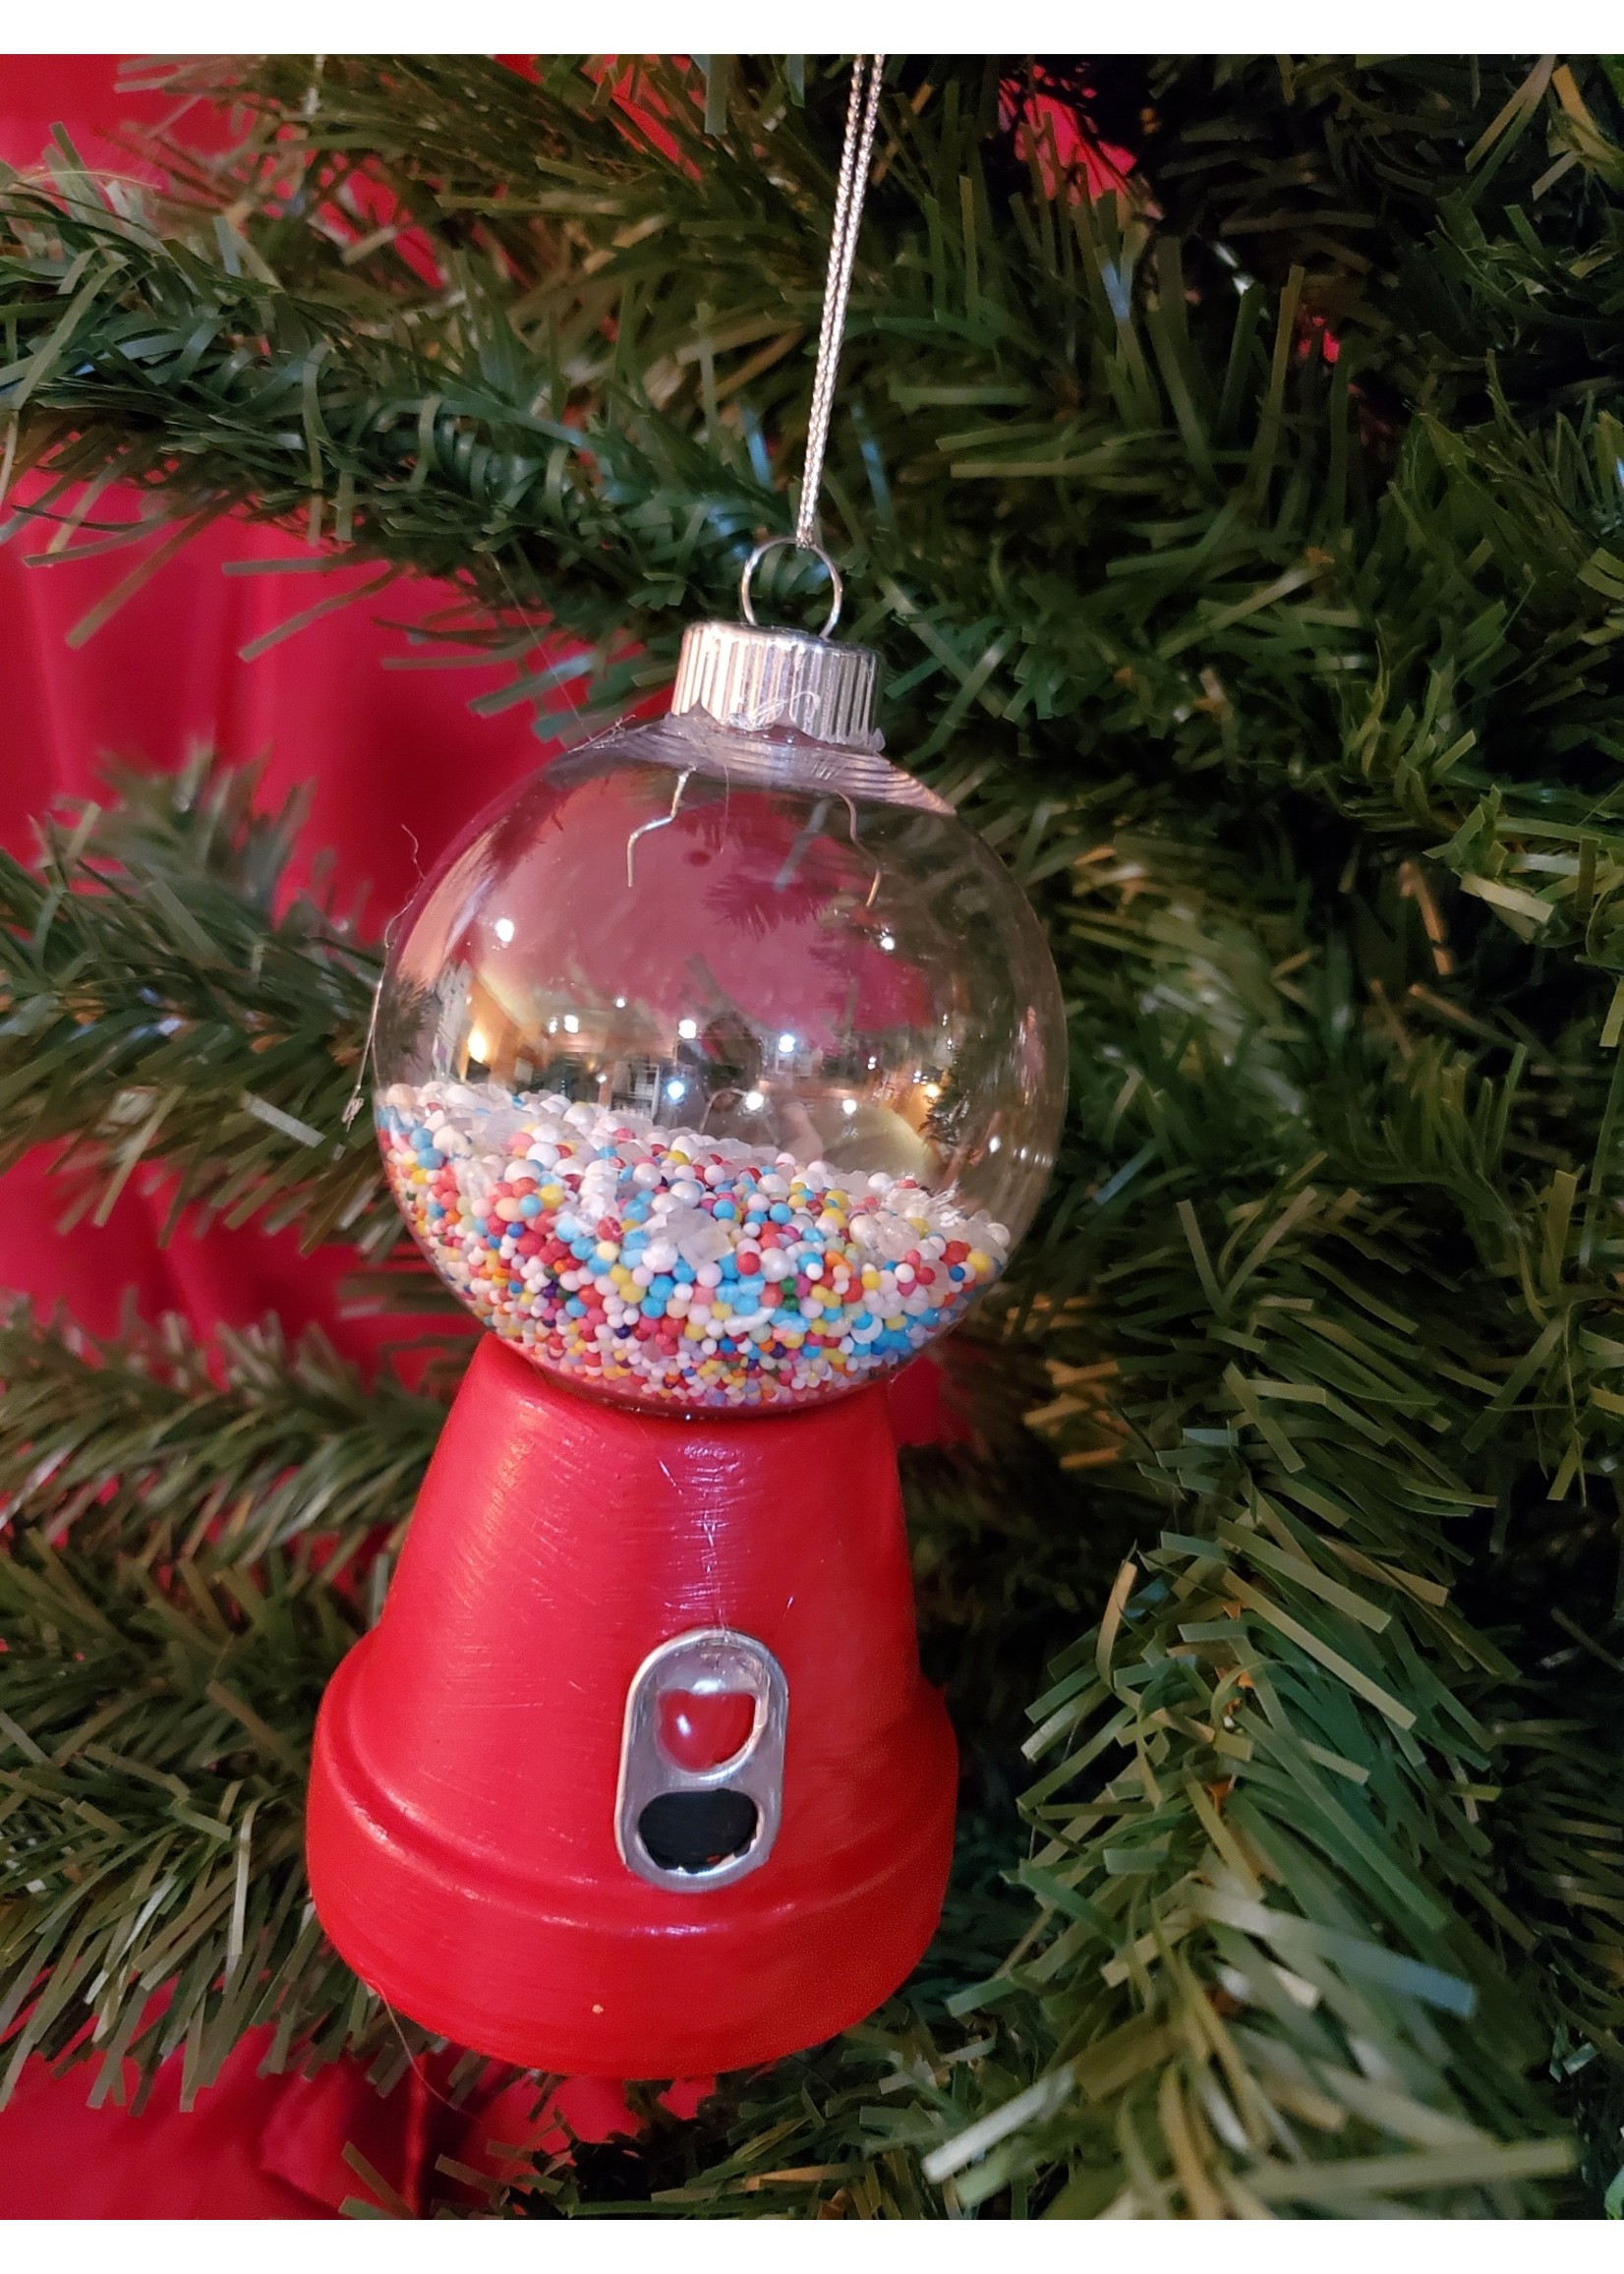 Sally Ward Ornament Fun Candy Machine filled with various nonpareils